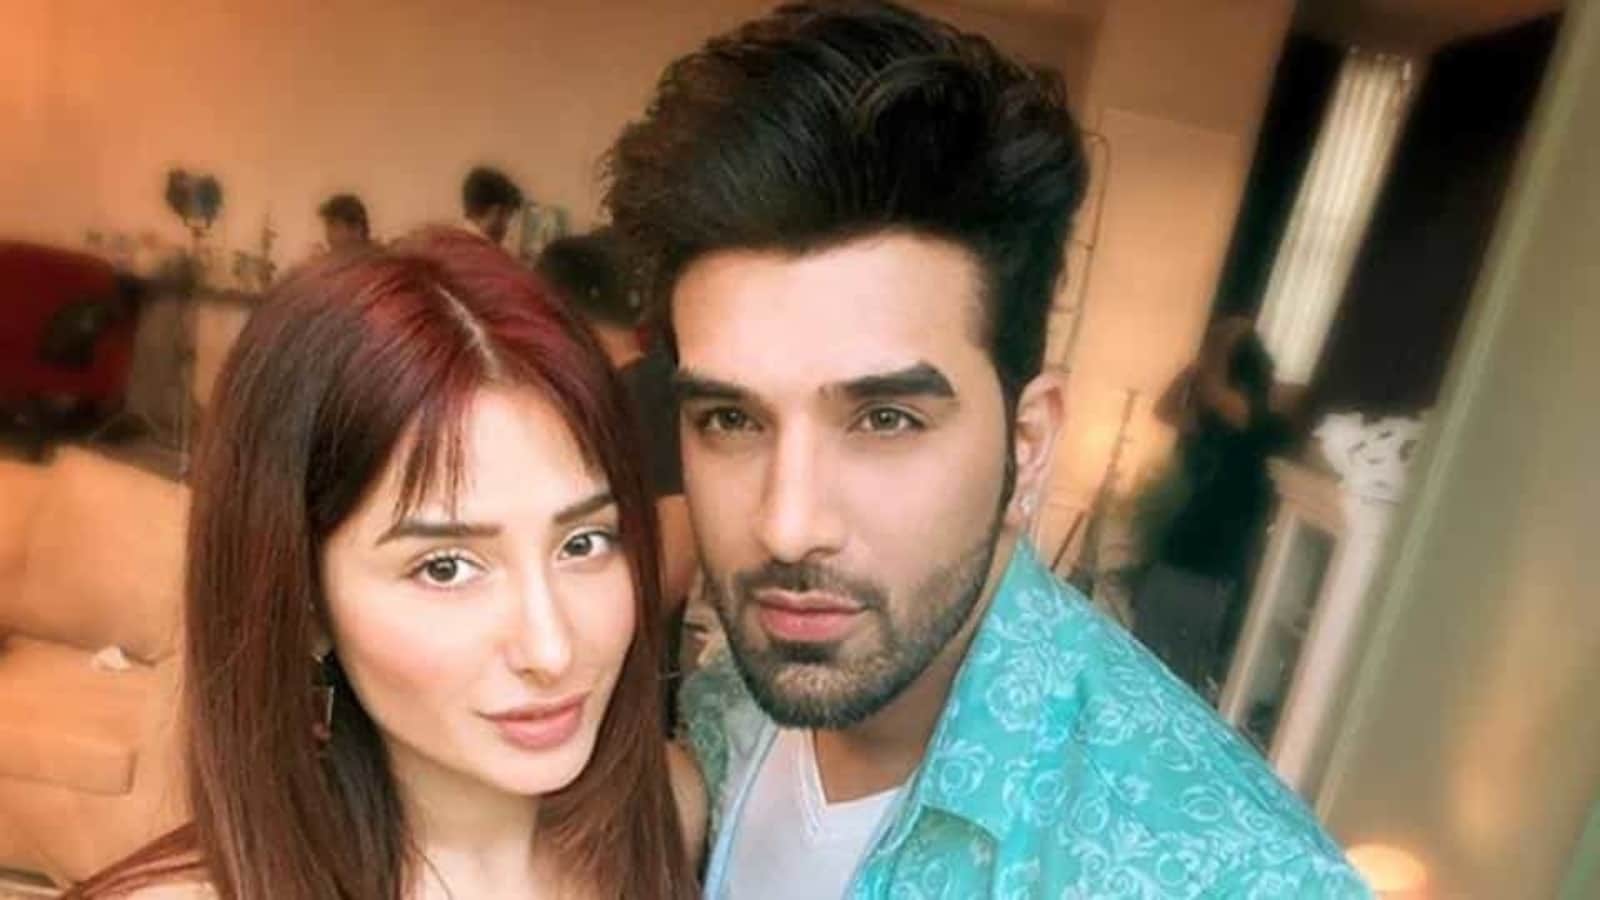 Mahira Sharma is 'more than a friend', but Paras Chhabra doesn't want to label it because controlling exes made him wary